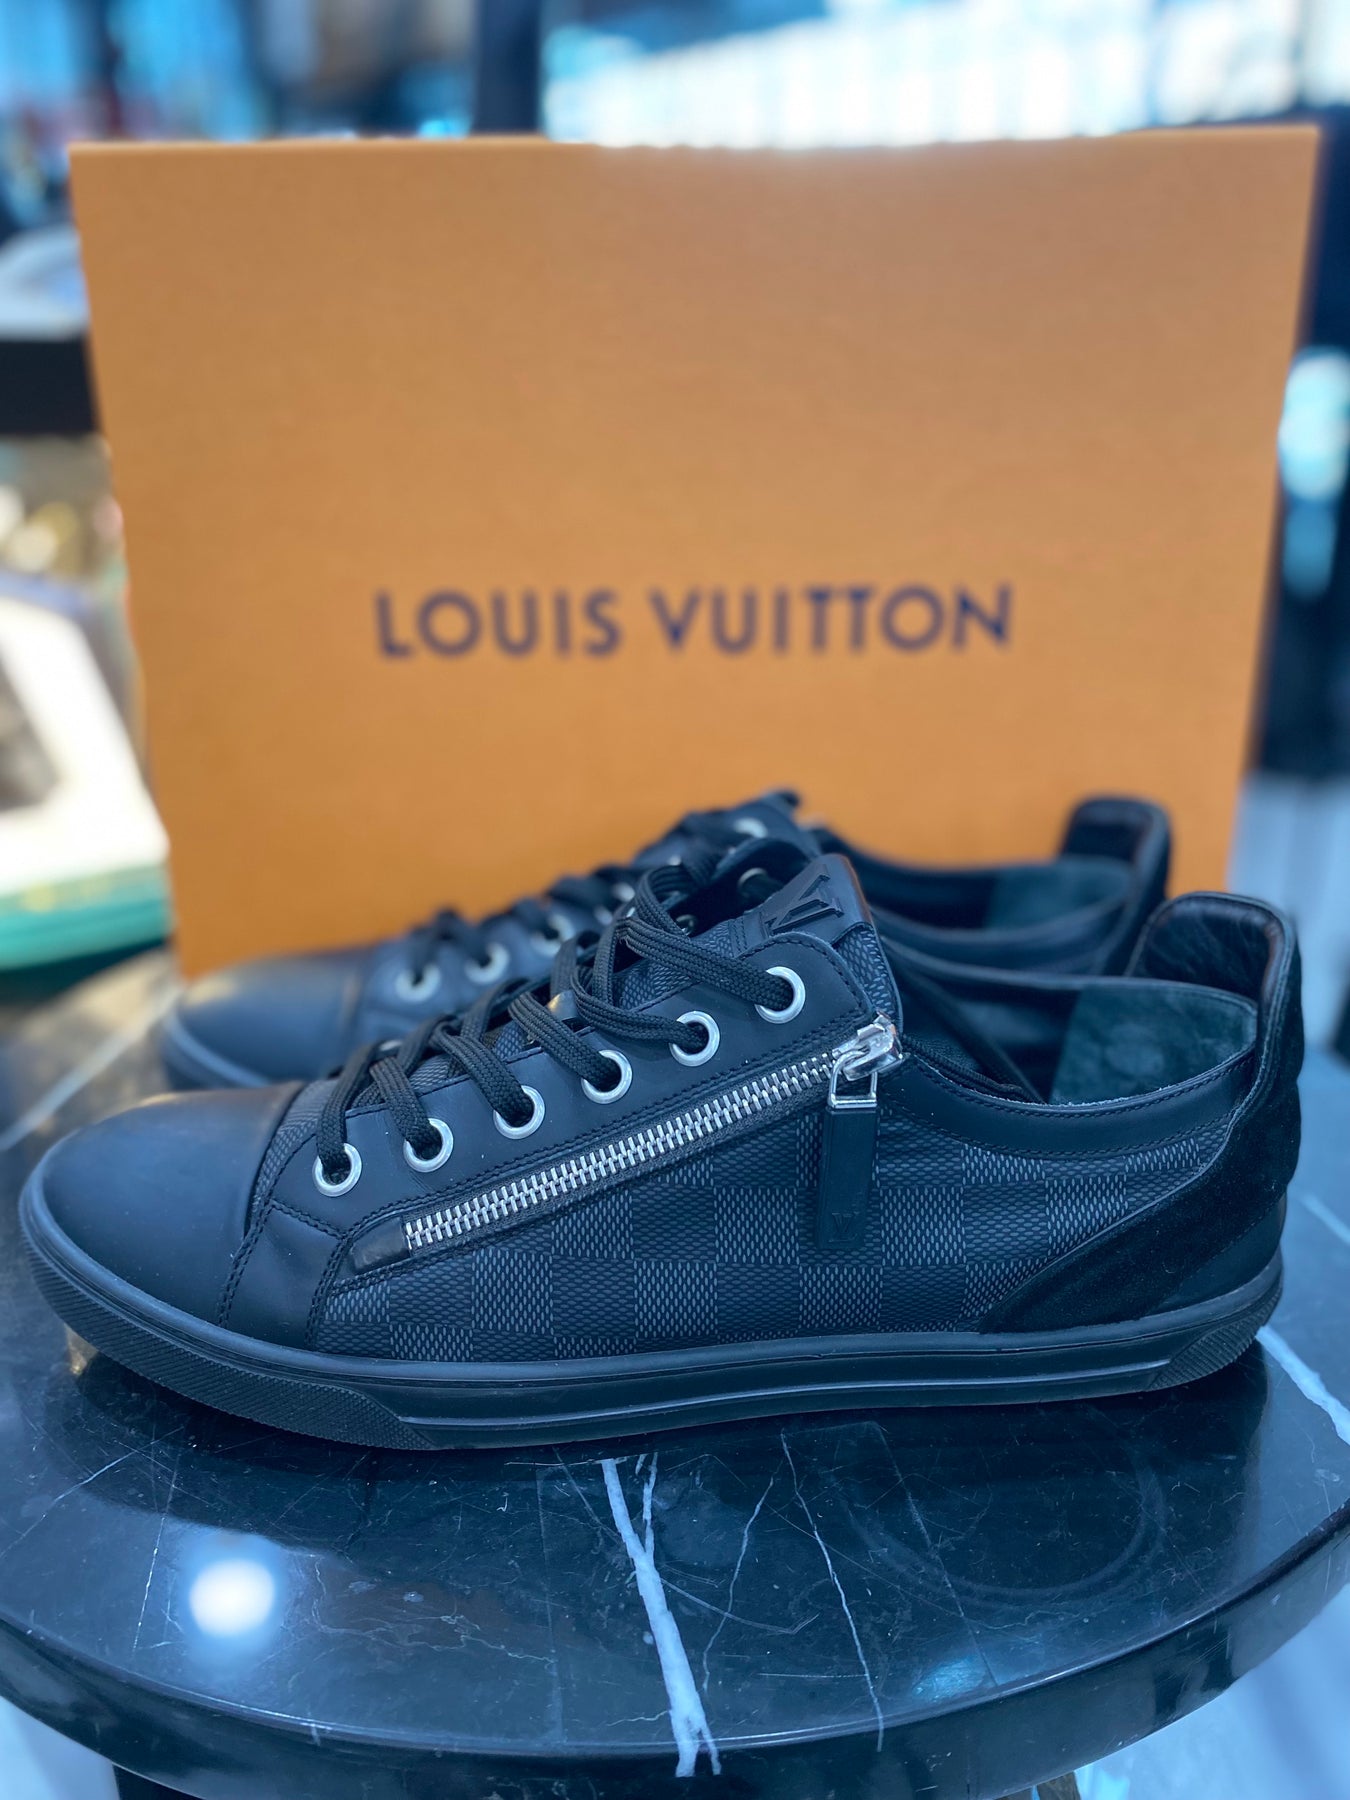 Louis Vuitton Damier Graphite Fabric and Leather Trim Zip Up High